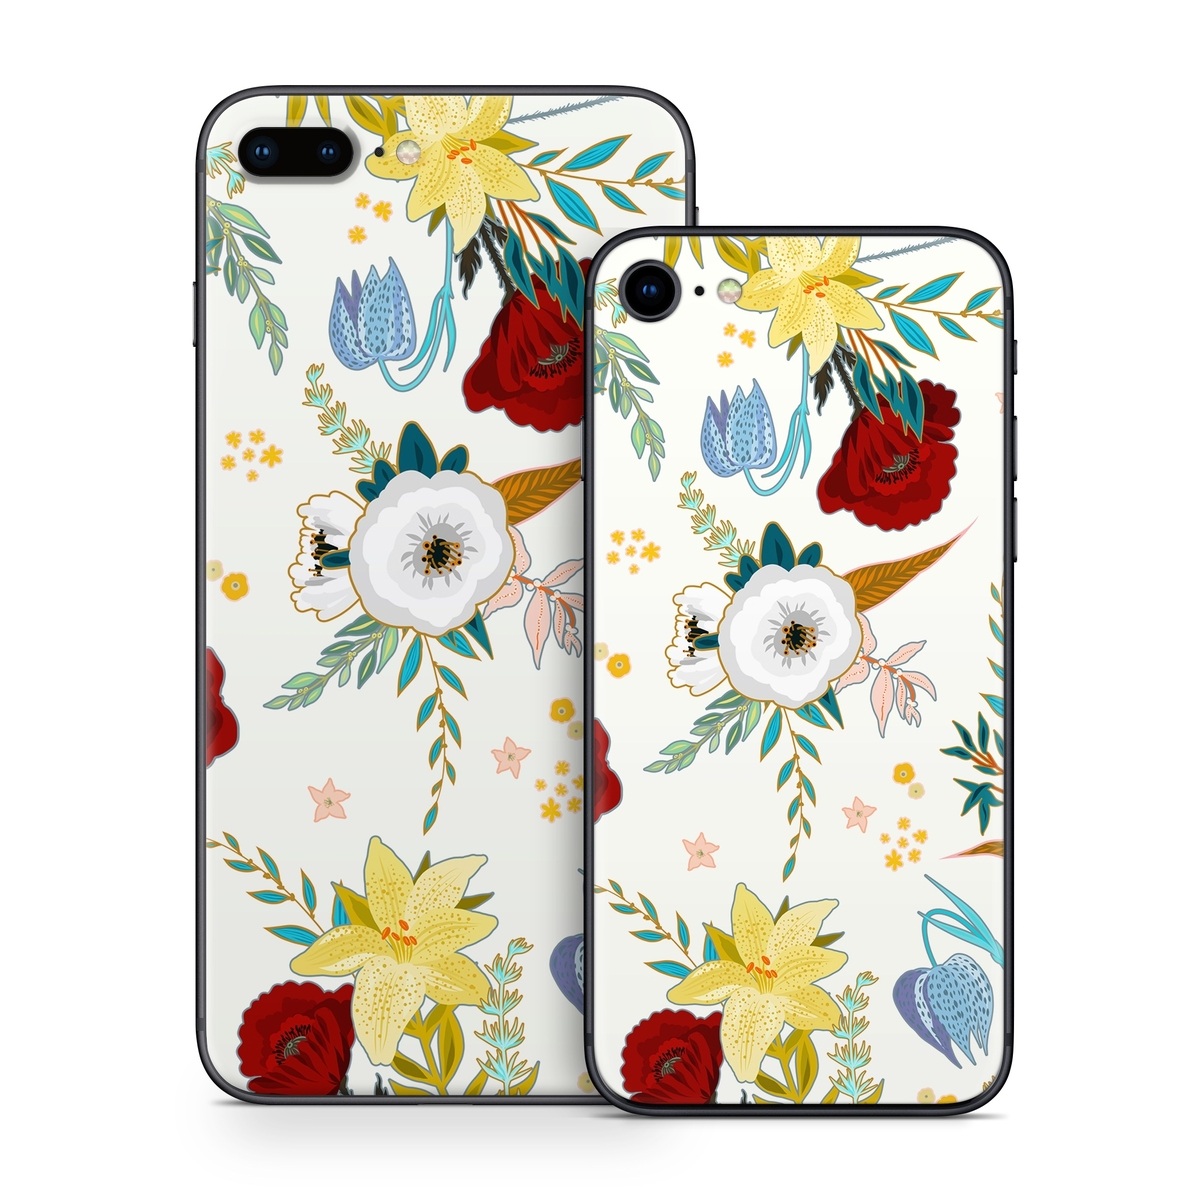 iPhone 8 Skin design of Floral design, Pattern, Wrapping paper, Botany, Design, Flower, Wallpaper, Plant, Clip art, Pedicel with white, blue, red, yellow, pink, orange colors